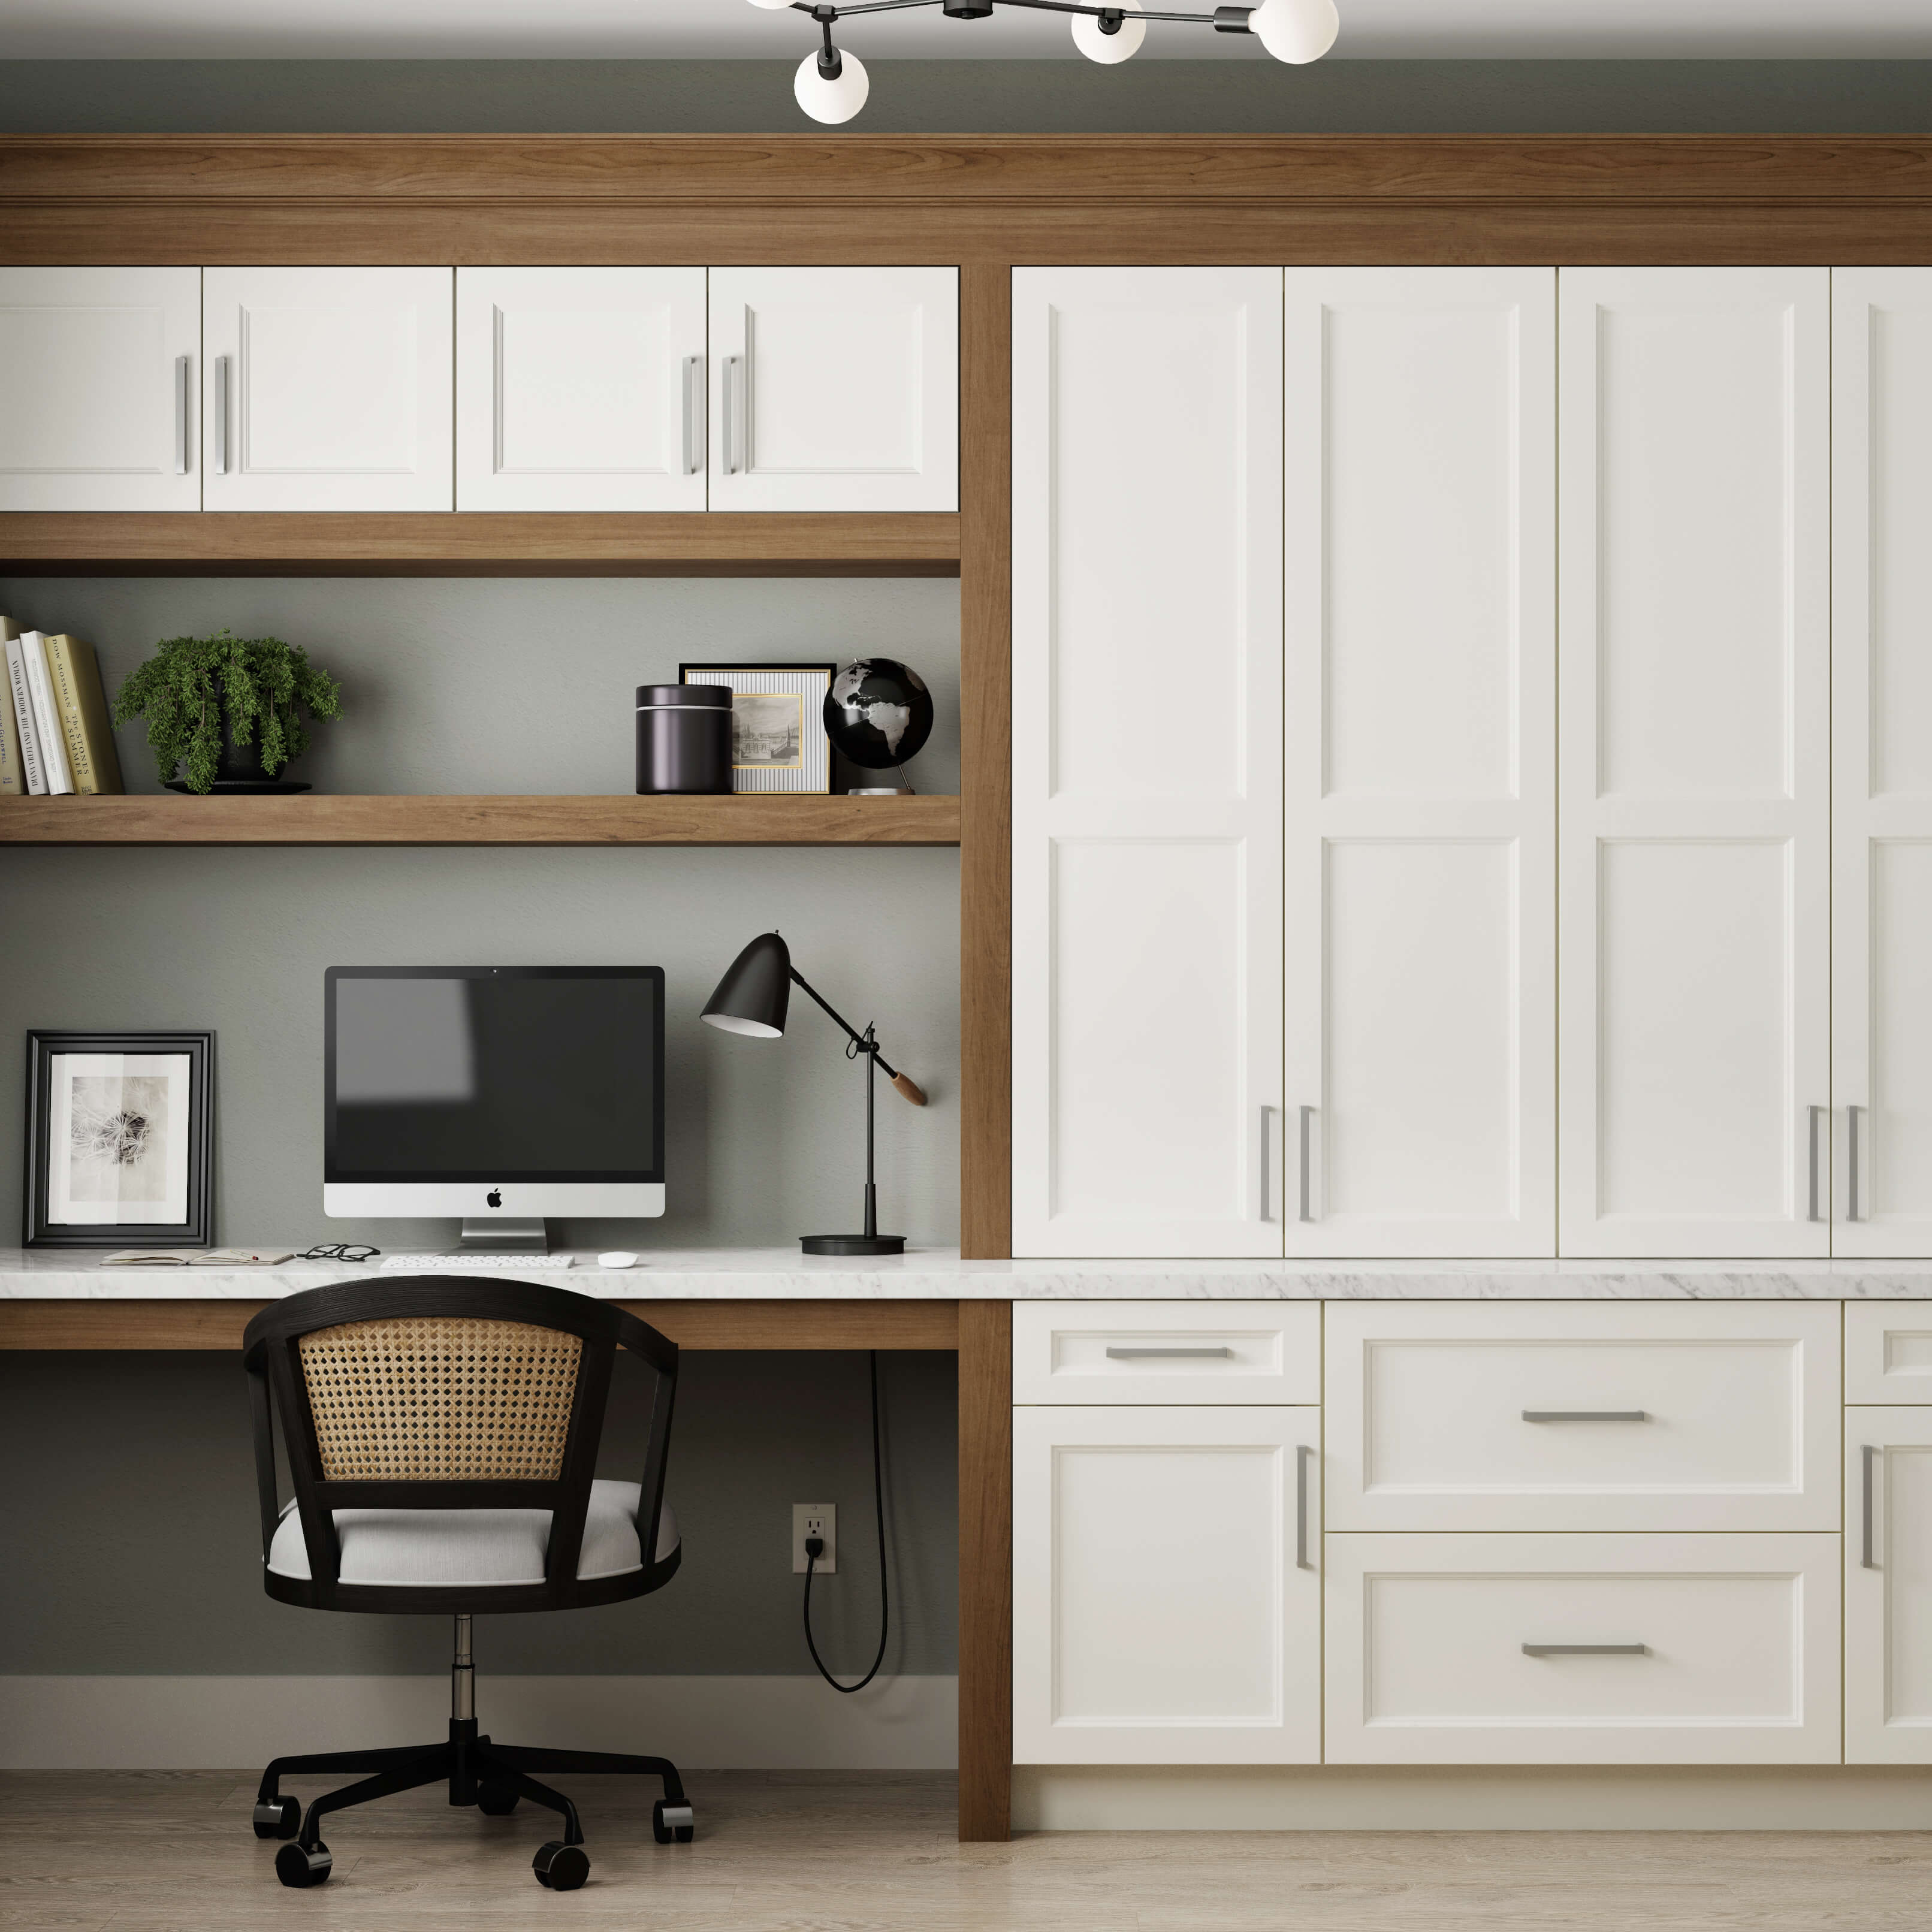 A home office nook design with the new flat panel door style from Dura Supreme.